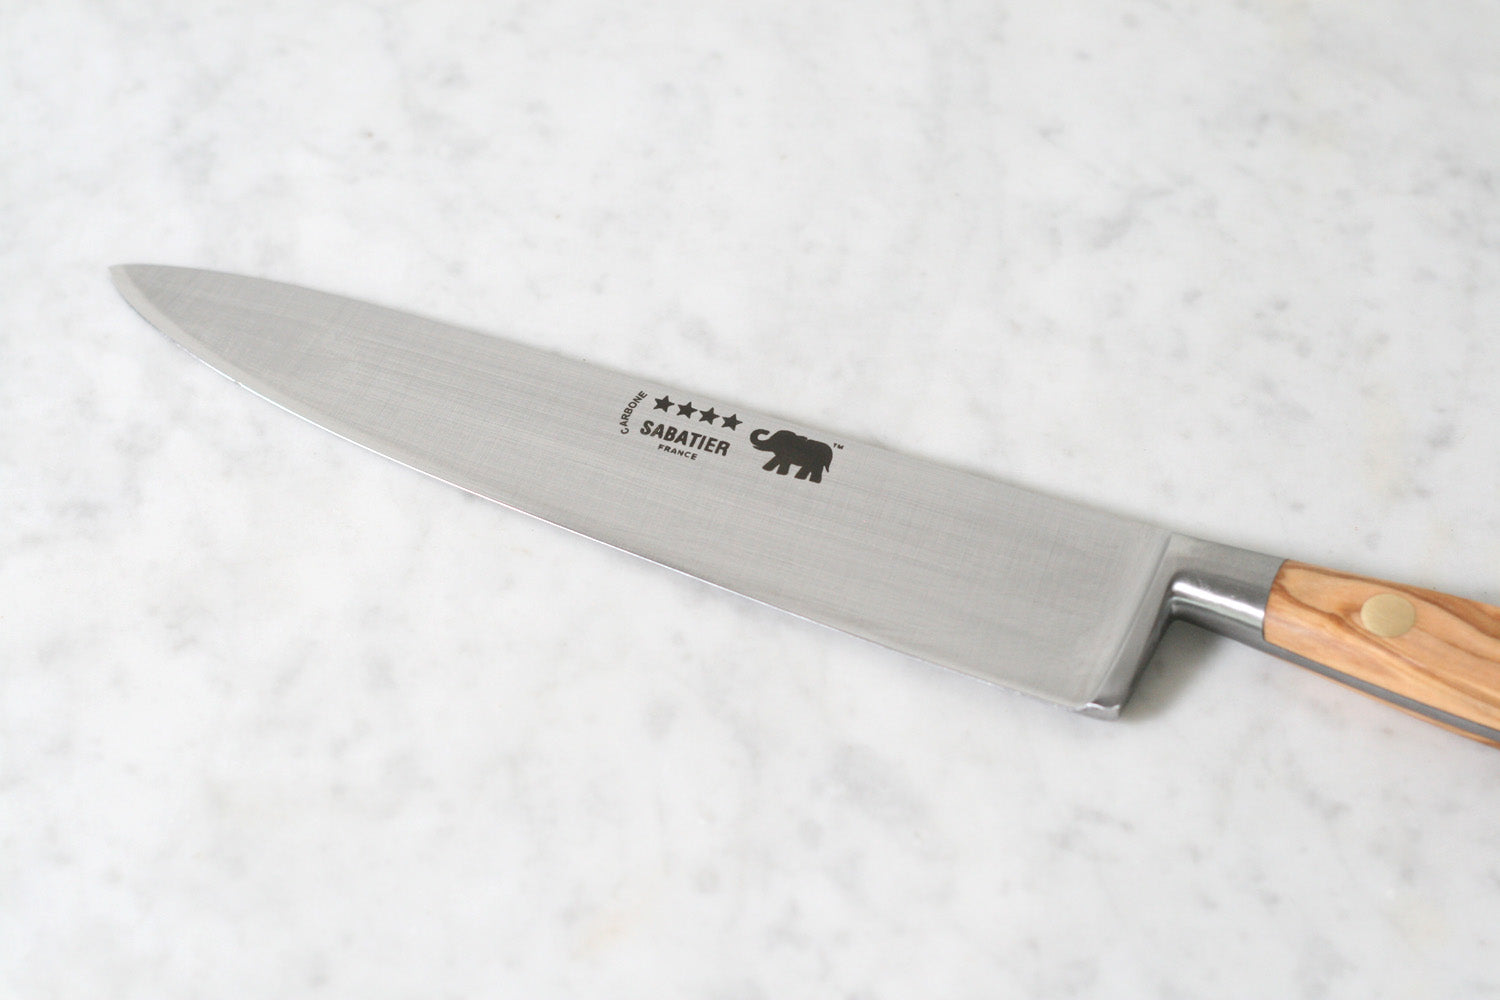 Sabatier 8" Chef's Knife Carbone Steel with Olivewood Handle